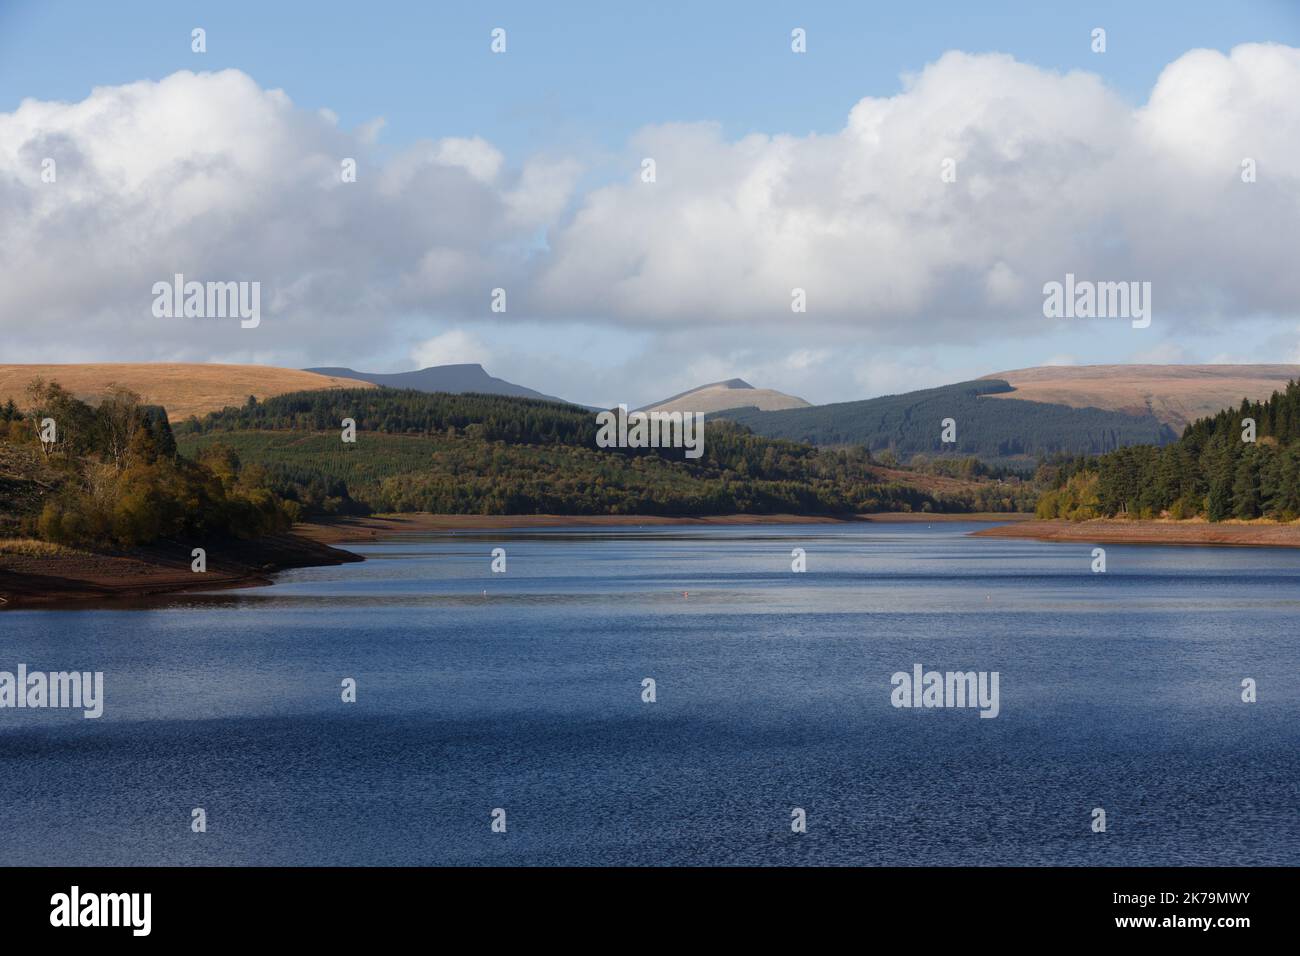 Pontsticill reservoir, Merthyr Tydfil, South Wales, UK.  17 October '22.  UK weather: A sunny afternoon at the reservoir, towards the Brecon Beacons.  Credit: Andrew Bartlett/Alamy Live News. Stock Photo